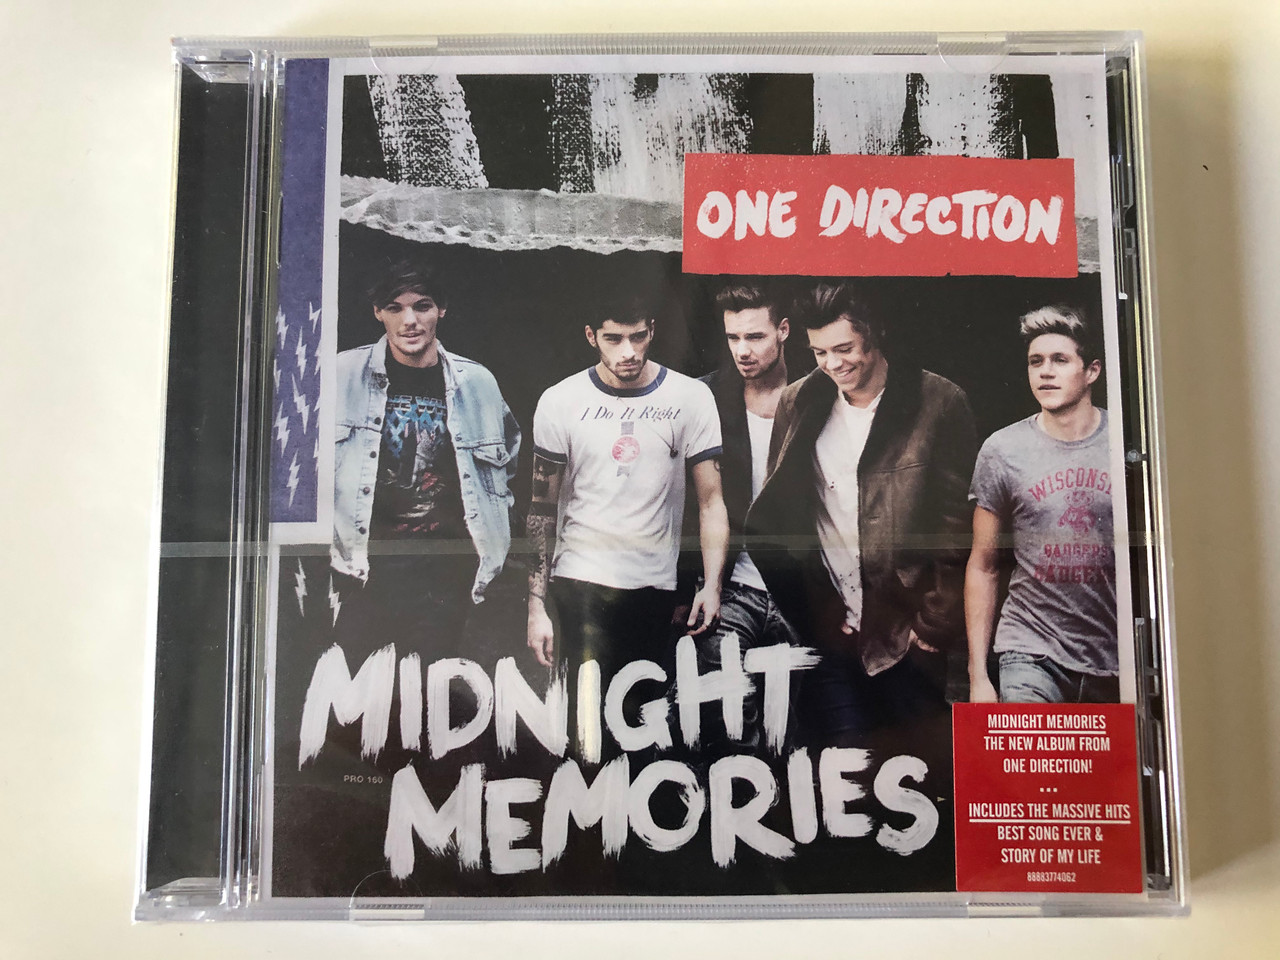 One Direction ‎– Midnight Memories / The New Album From One Direction! /  Includes the Massive Hits - Best Song Ever & Story of My Life / Sony Music  ‎Audio CD 2013 / 88883774062 - bibleinmylanguage